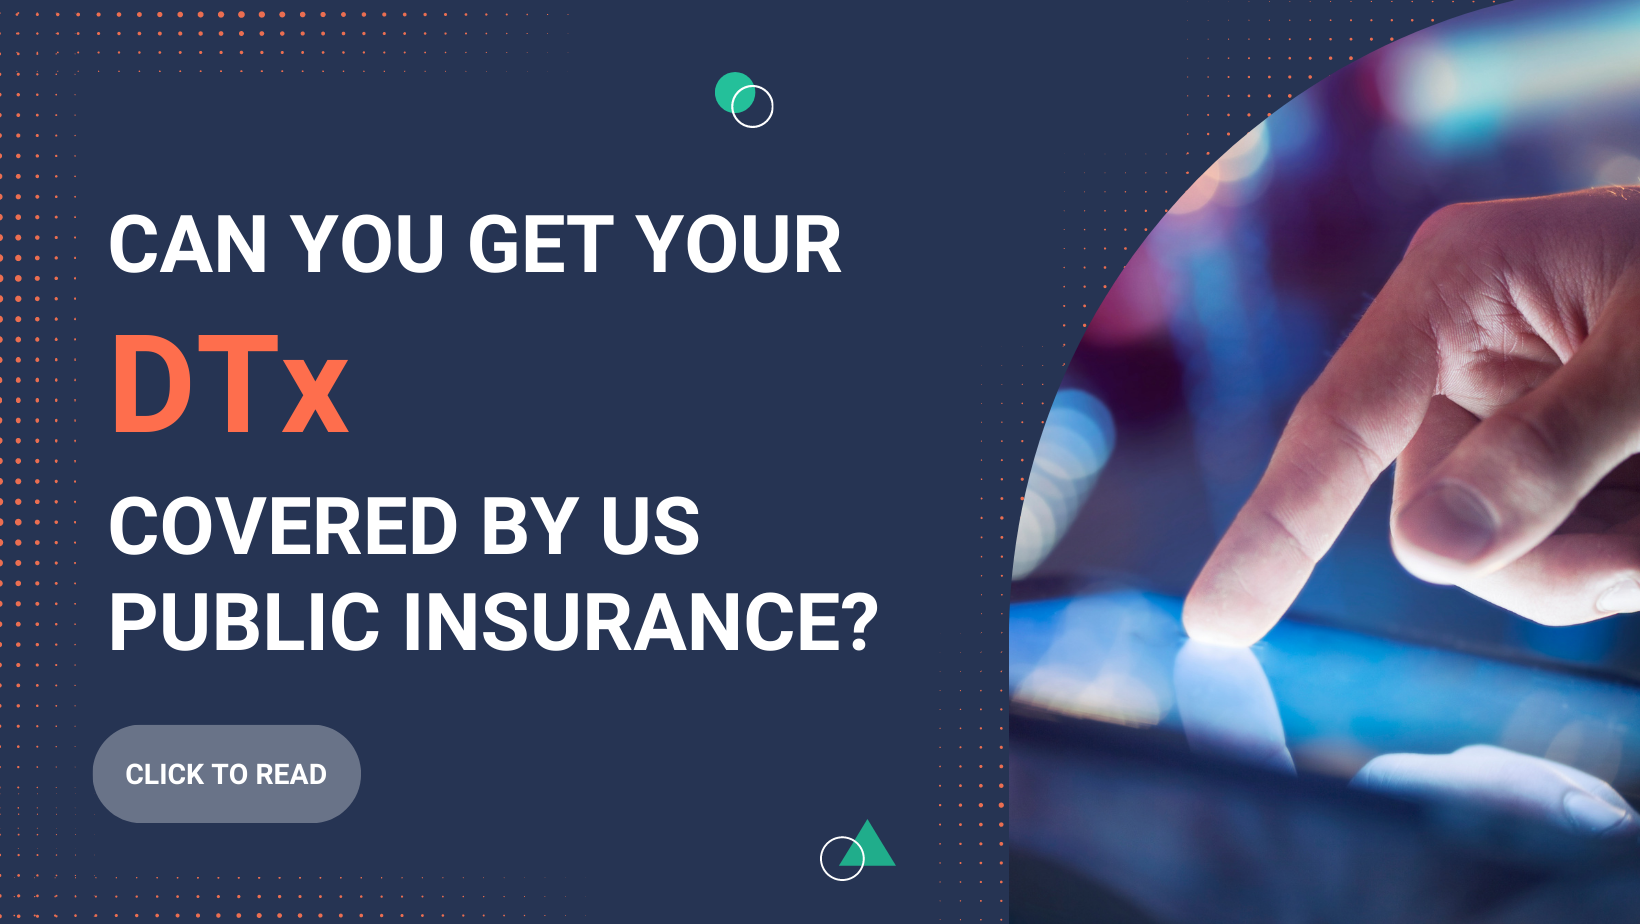 Blog banner with a finger touching a tablet. The sentence is: Can you get your DTx covered by US public insurance?